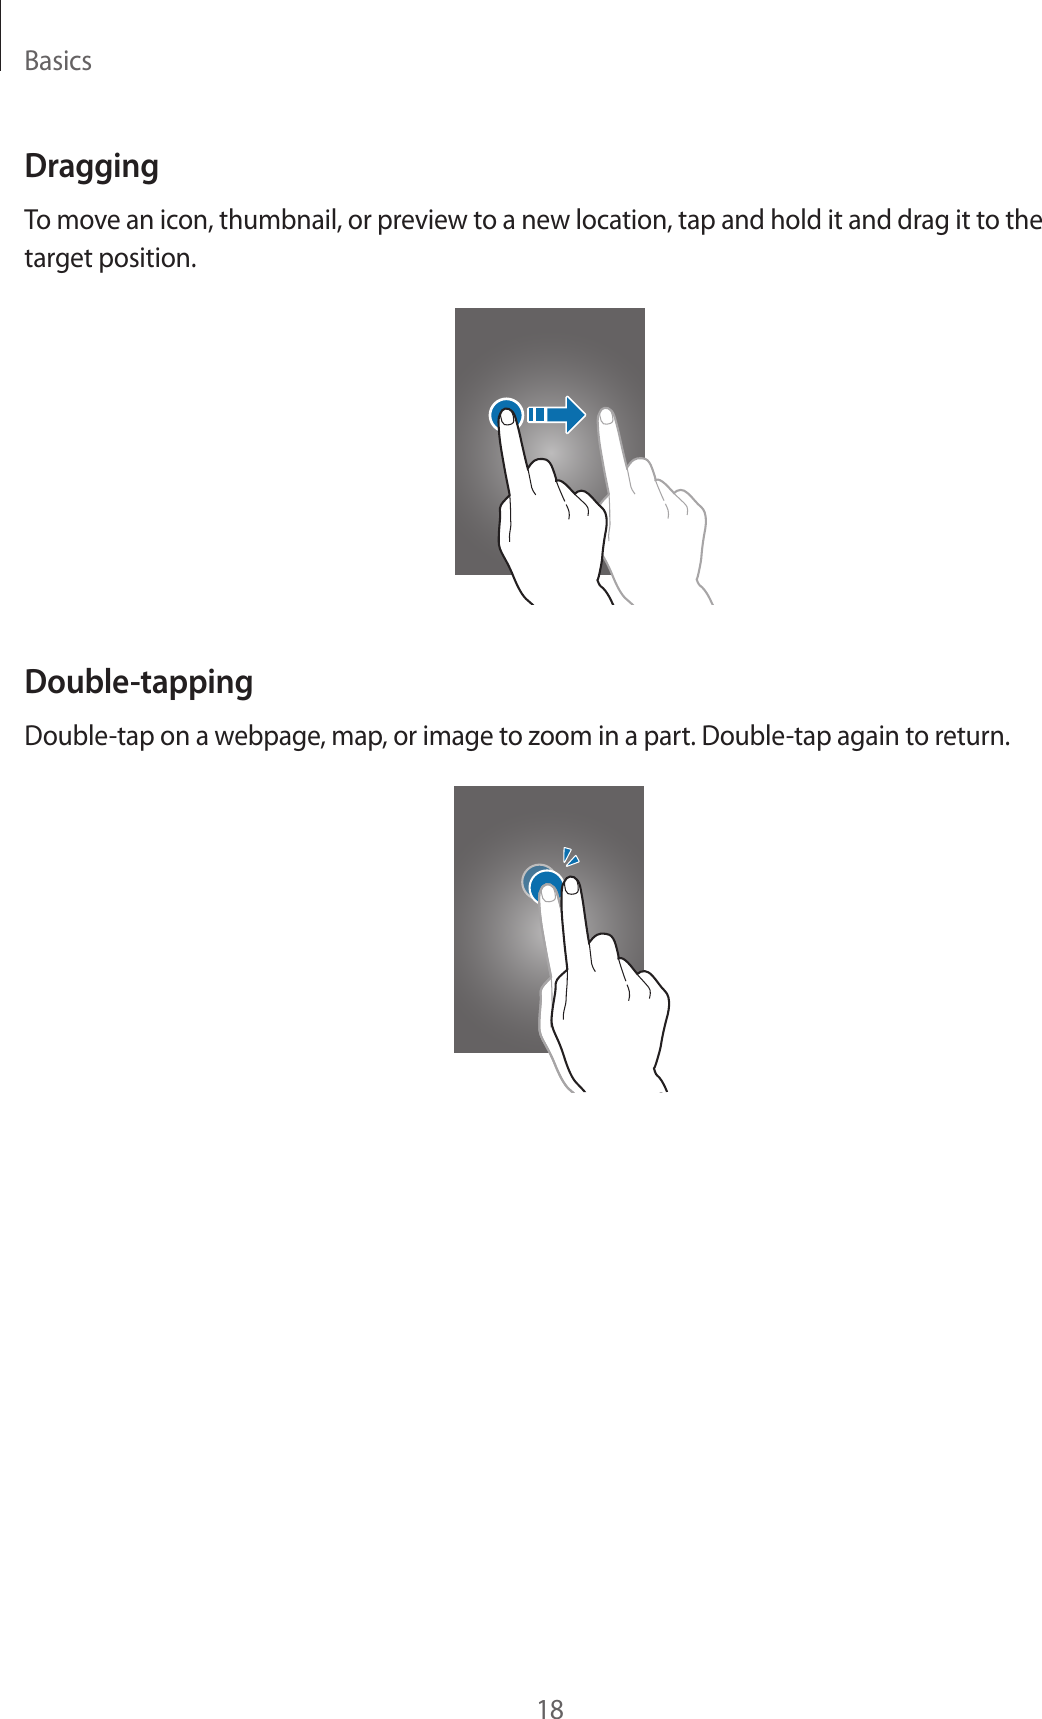 Basics18DraggingTo move an icon, thumbnail, or preview to a new location, tap and hold it and drag it to the target position.Double-tappingDouble-tap on a webpage, map, or image to zoom in a part. Double-tap again to return.